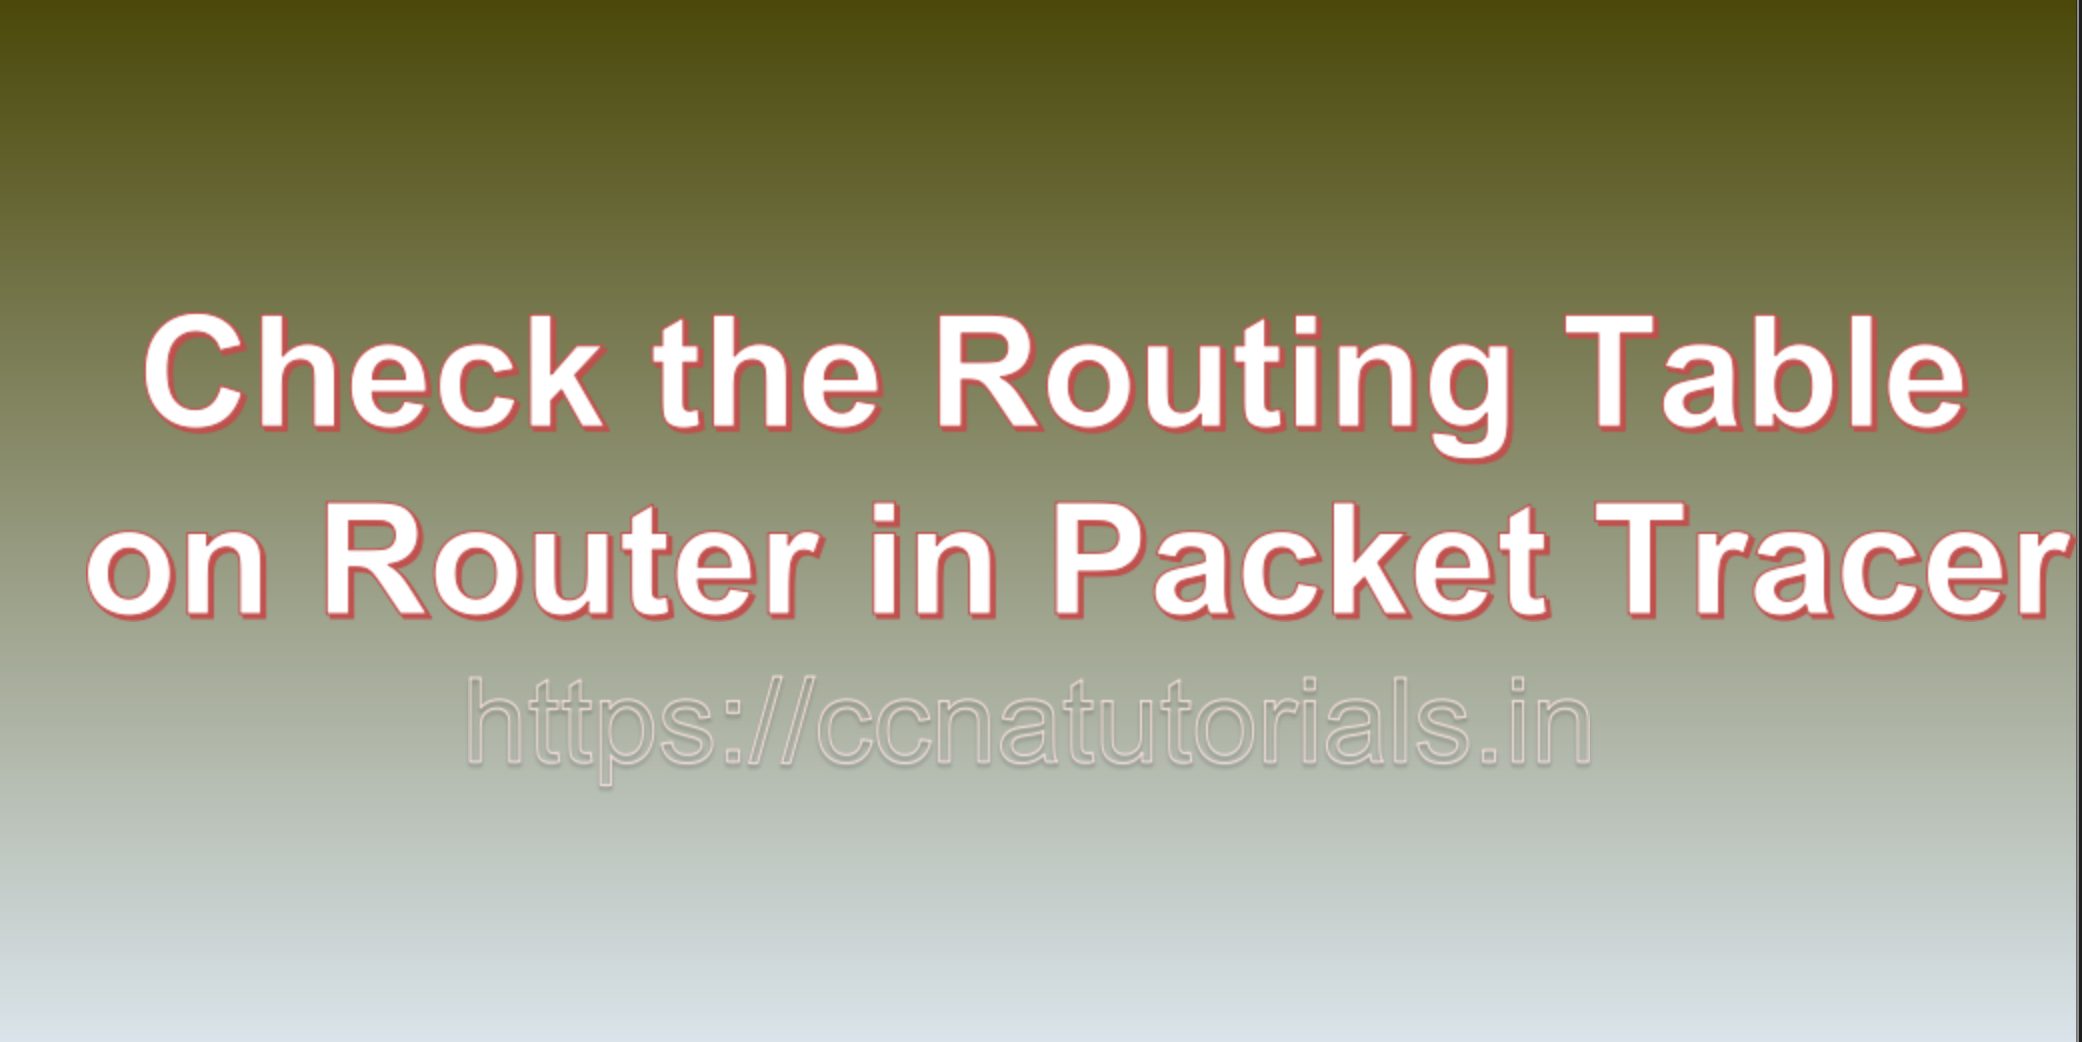 Check the Routing Table on a Router in Packet Tracer, ccna, ccna tutorials